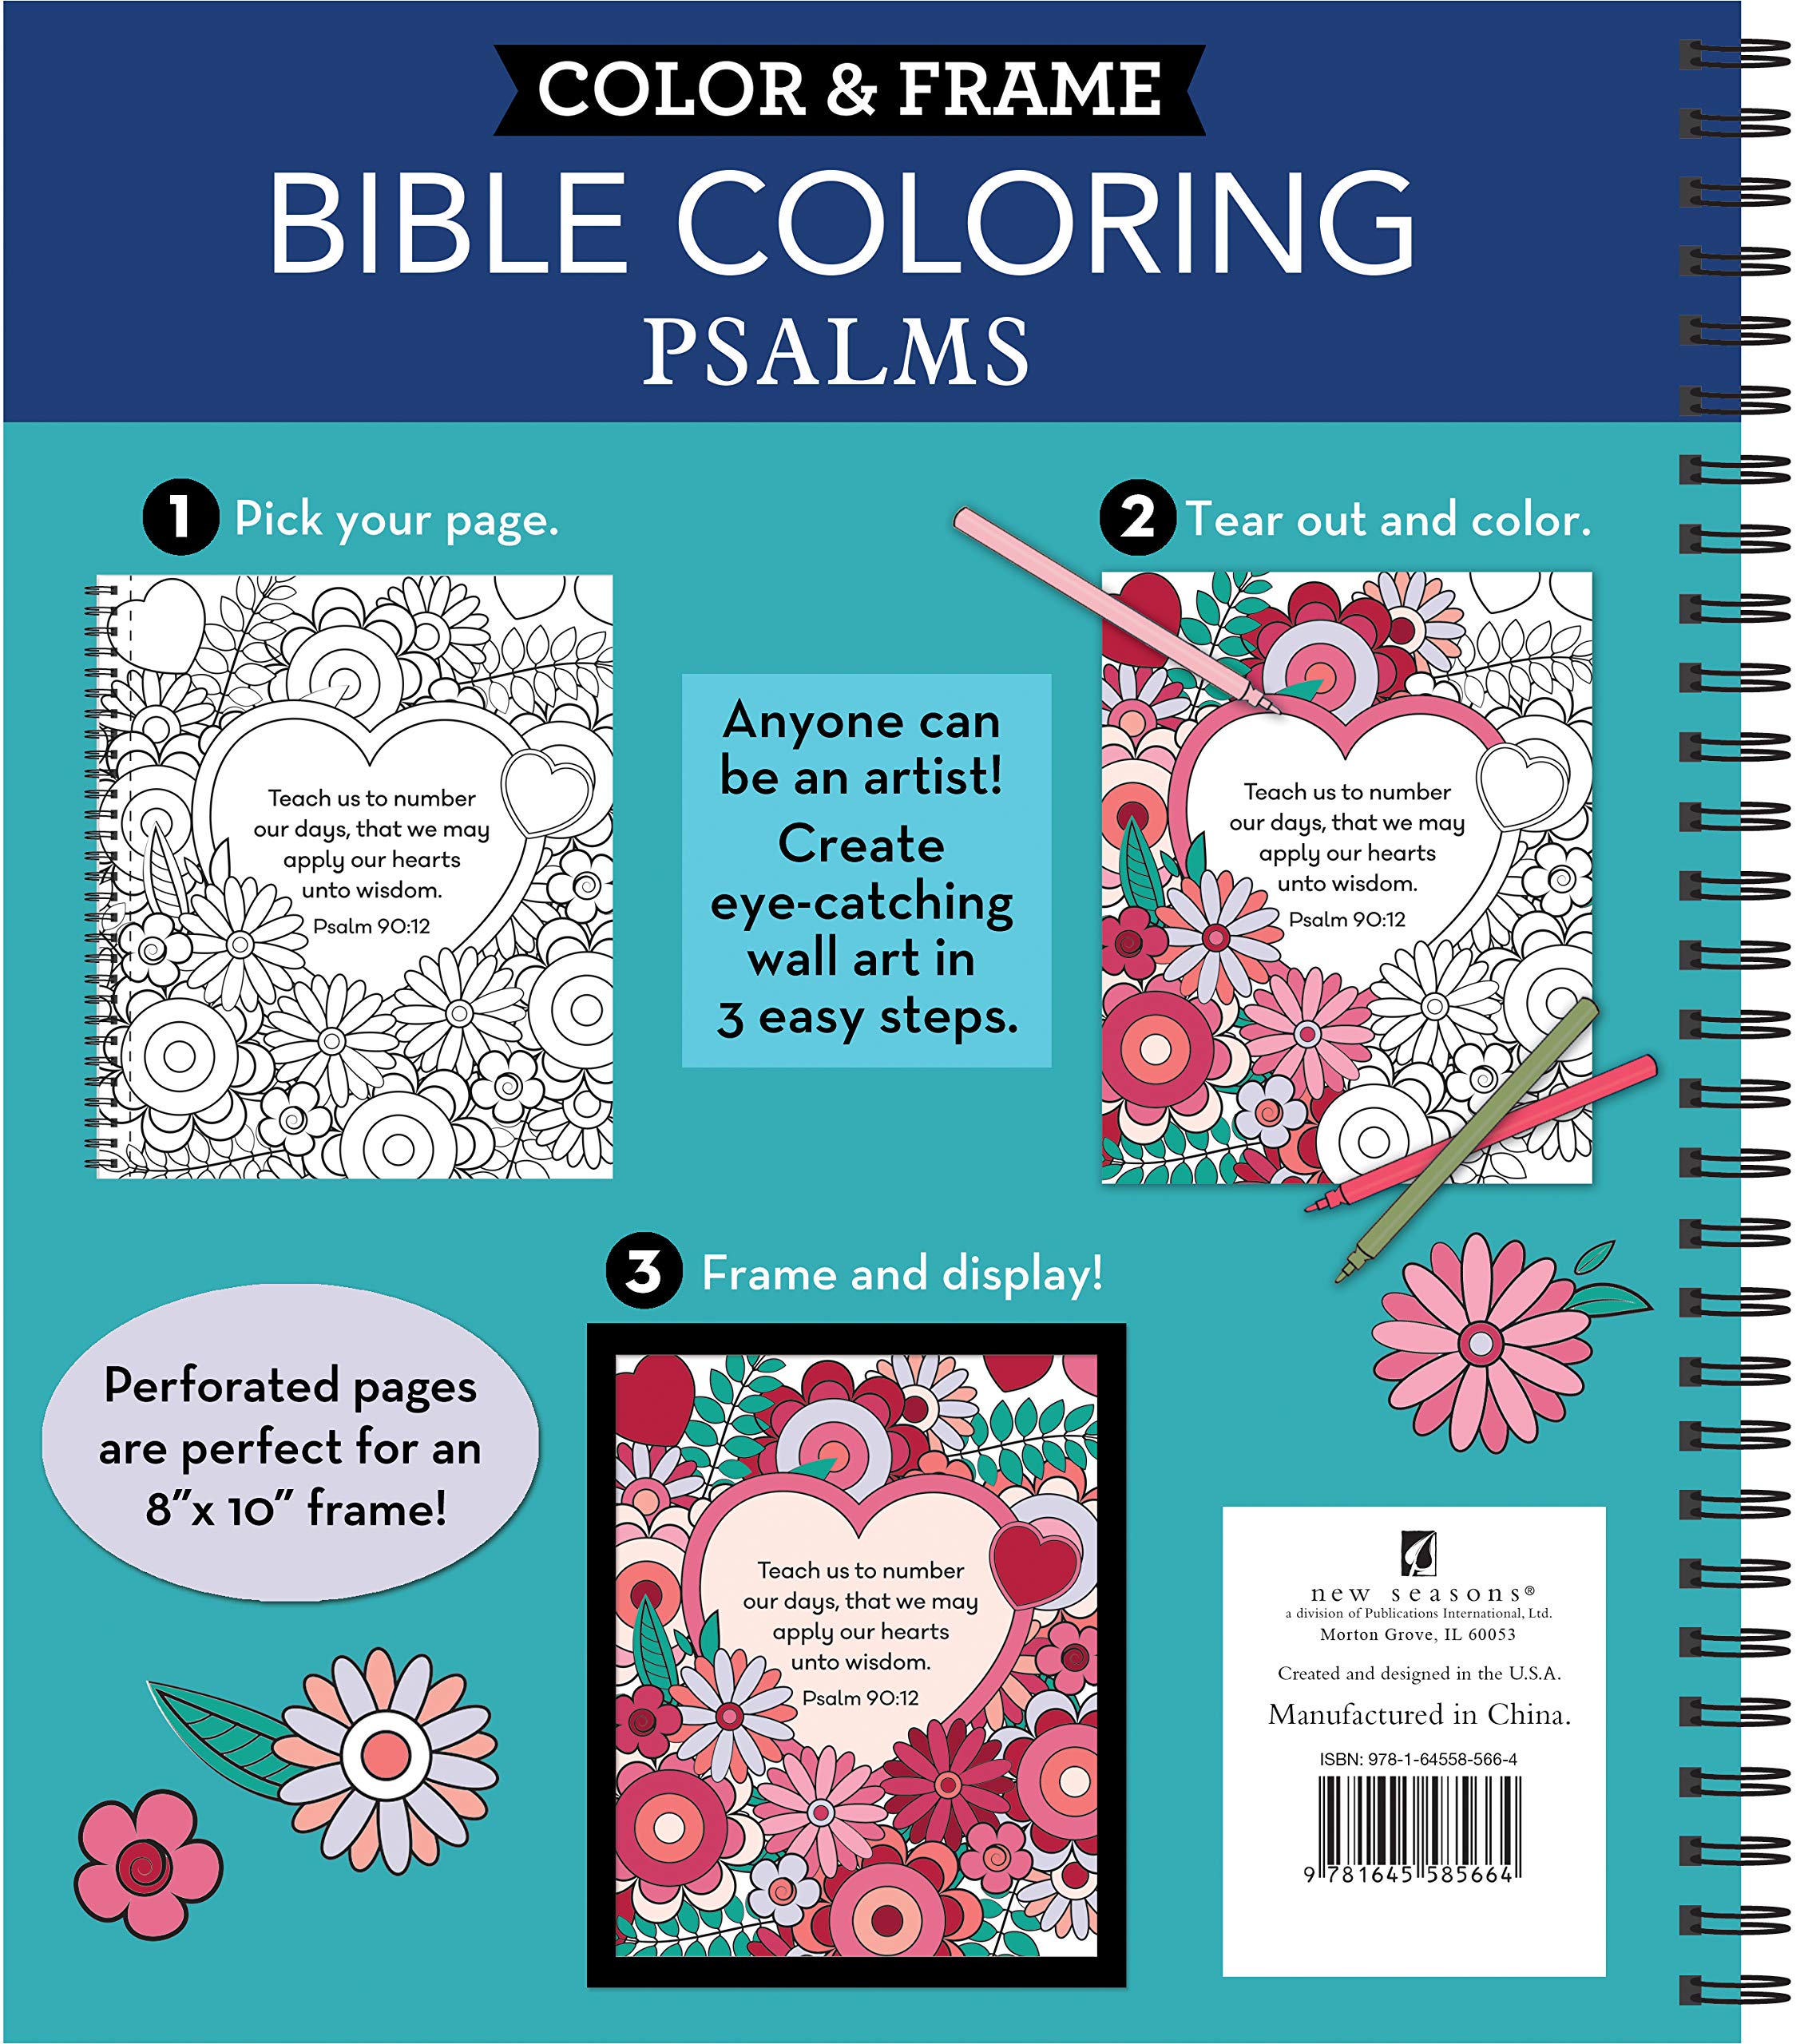 Color & Frame - Bible Coloring: Psalms (Adult Coloring Book)